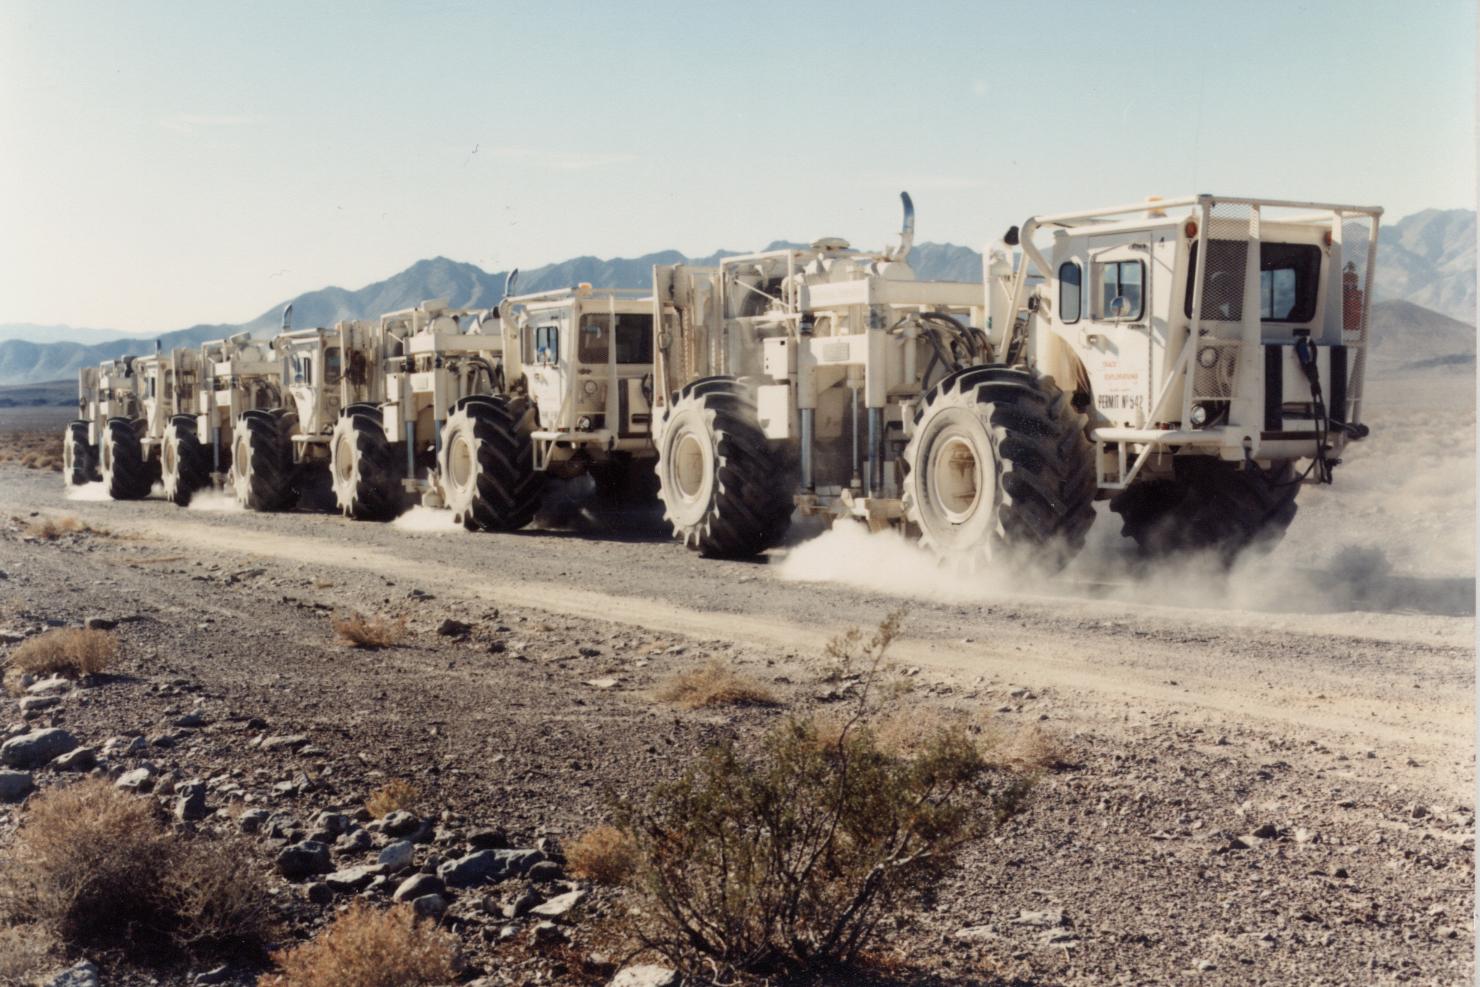 Trucks test for seismic activity at Yucca Mountain